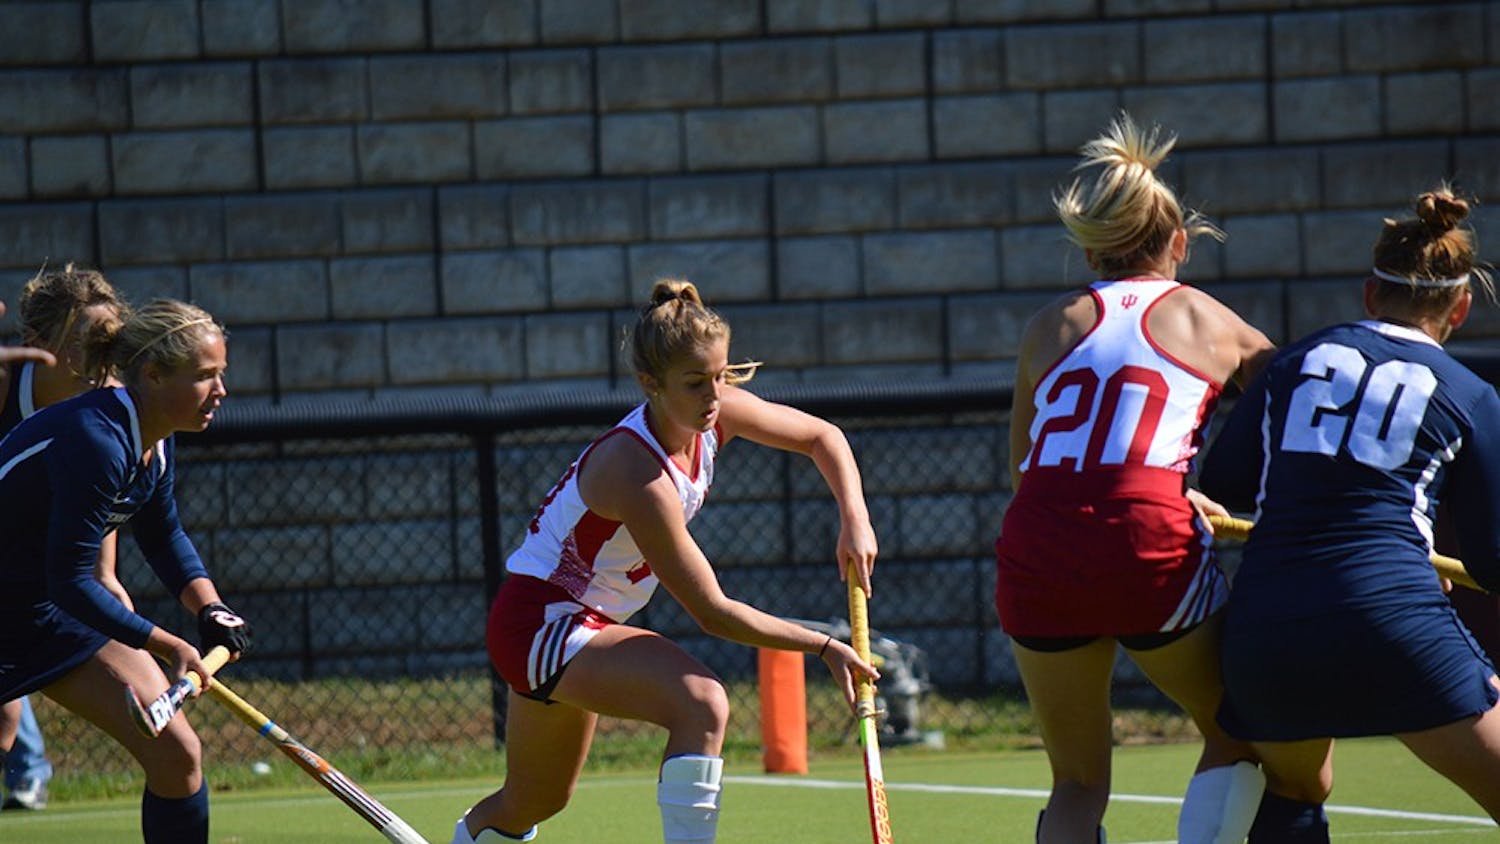 Sophomore midfielder Taylor Pearson takes a shot on goal during the game against Penn State Saturday at the IU Field Hockey Complex. The Hoosiers beat the Nittany Lions 1-0.